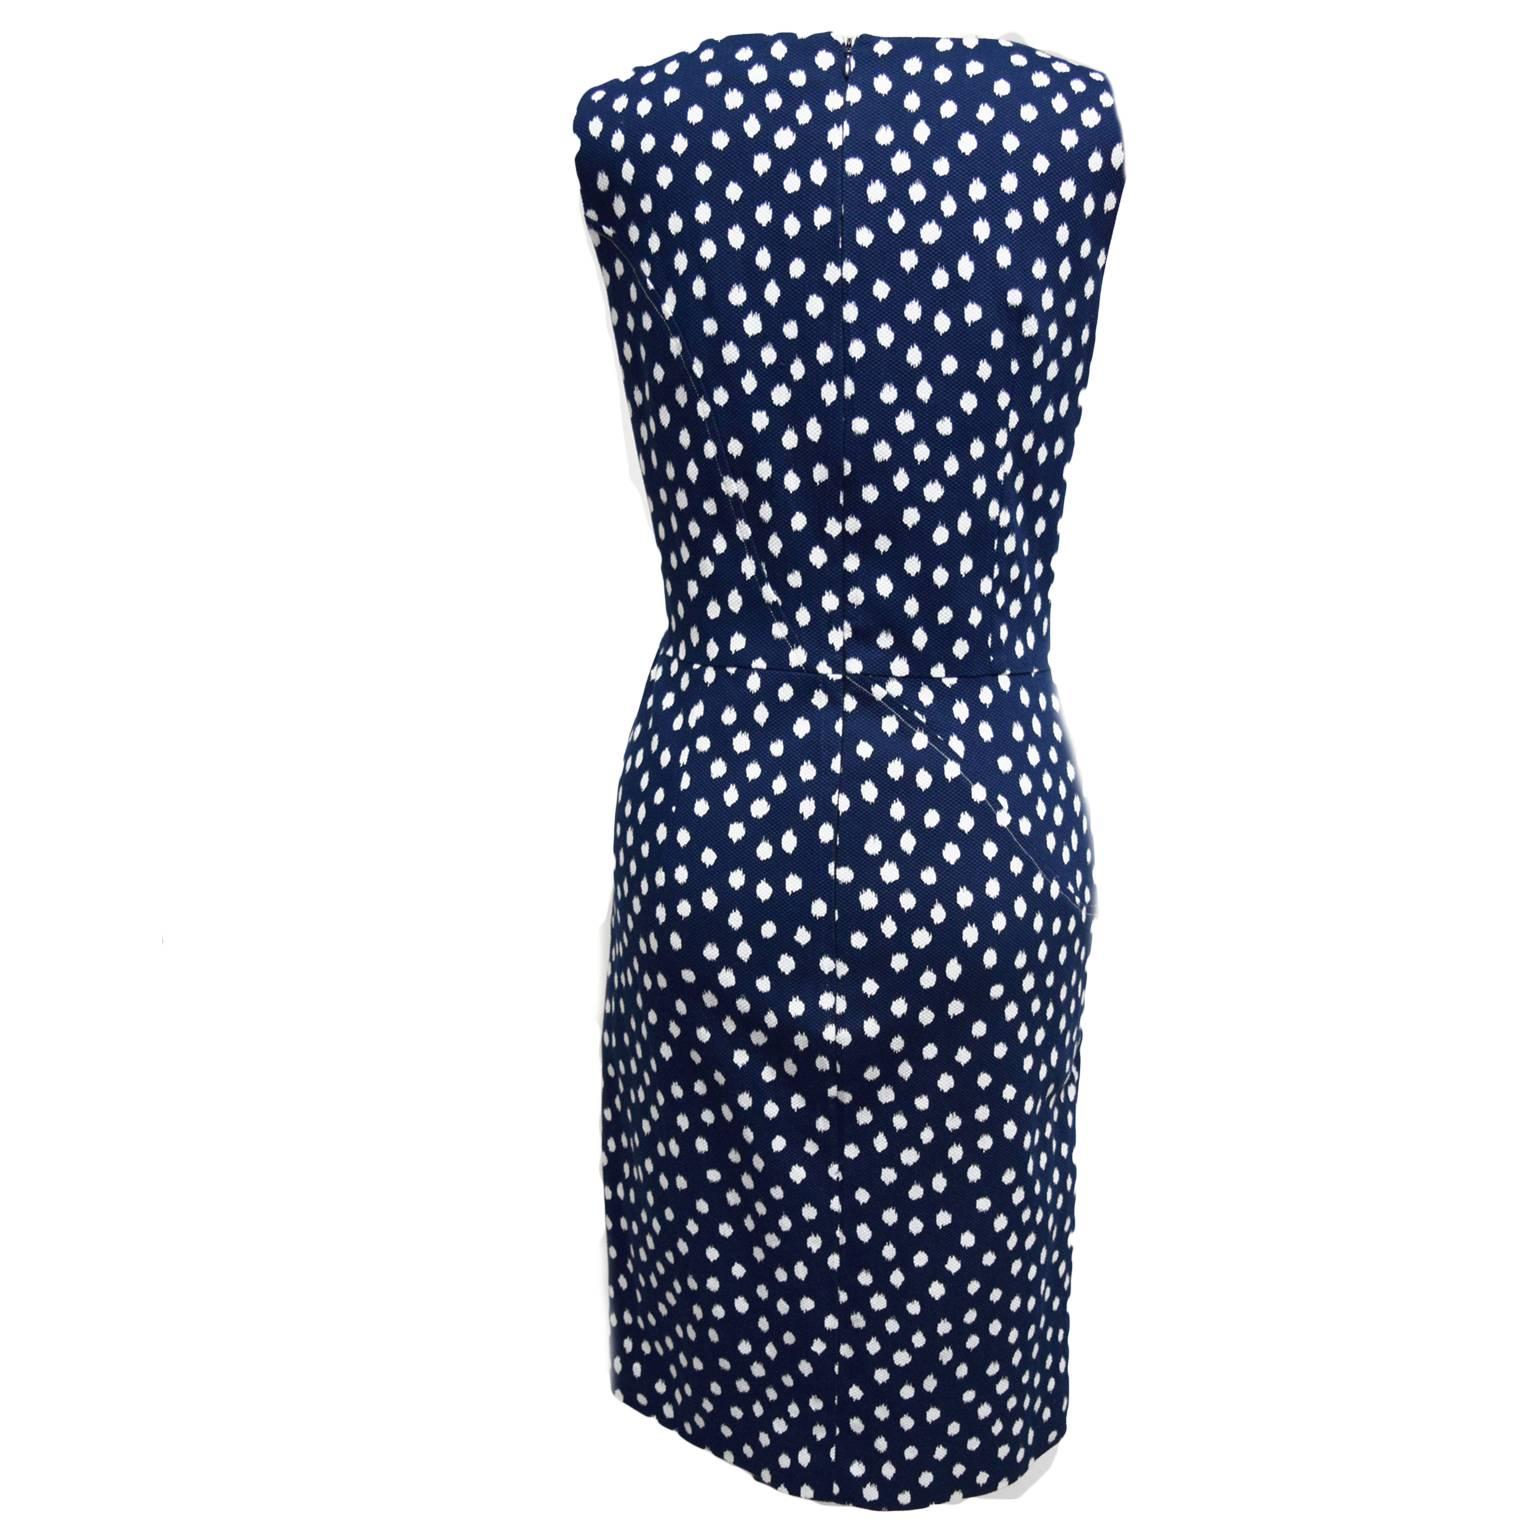 This Oscar de la Renta dress is 100% cotton. The neckline is a scooped neckline and the bodice has a wrapped gathering detail. The material is a navy and white printed abstract polka-dot print and the dress is fully lined with a zipped back closure. 